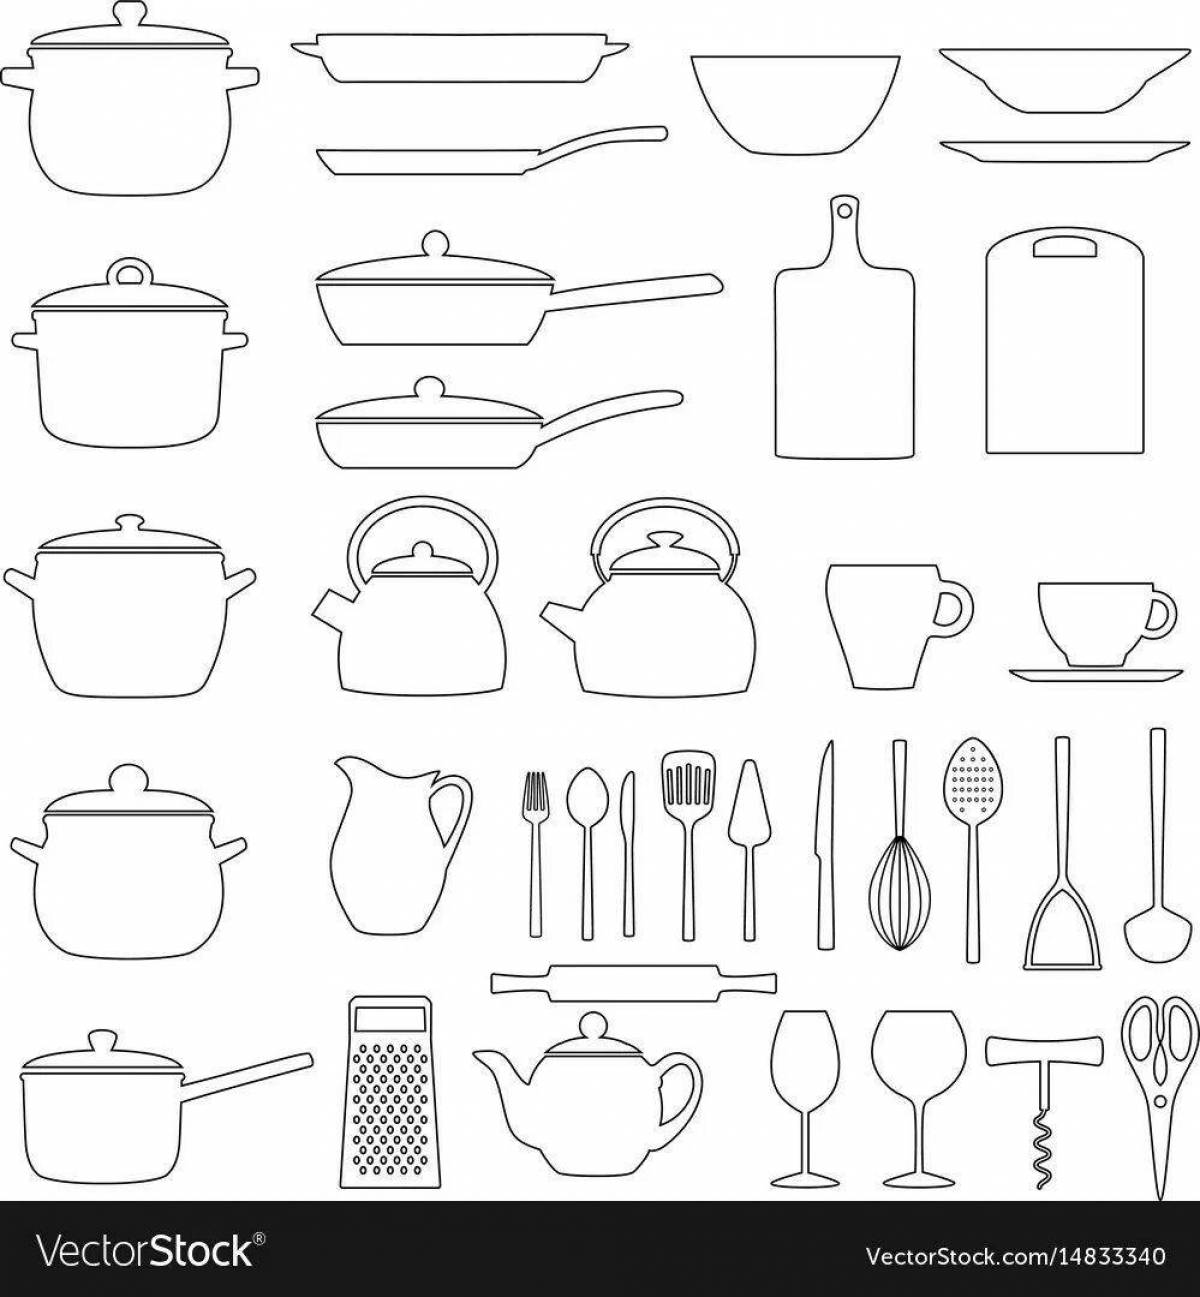 Coloring Page of Complex Tableware